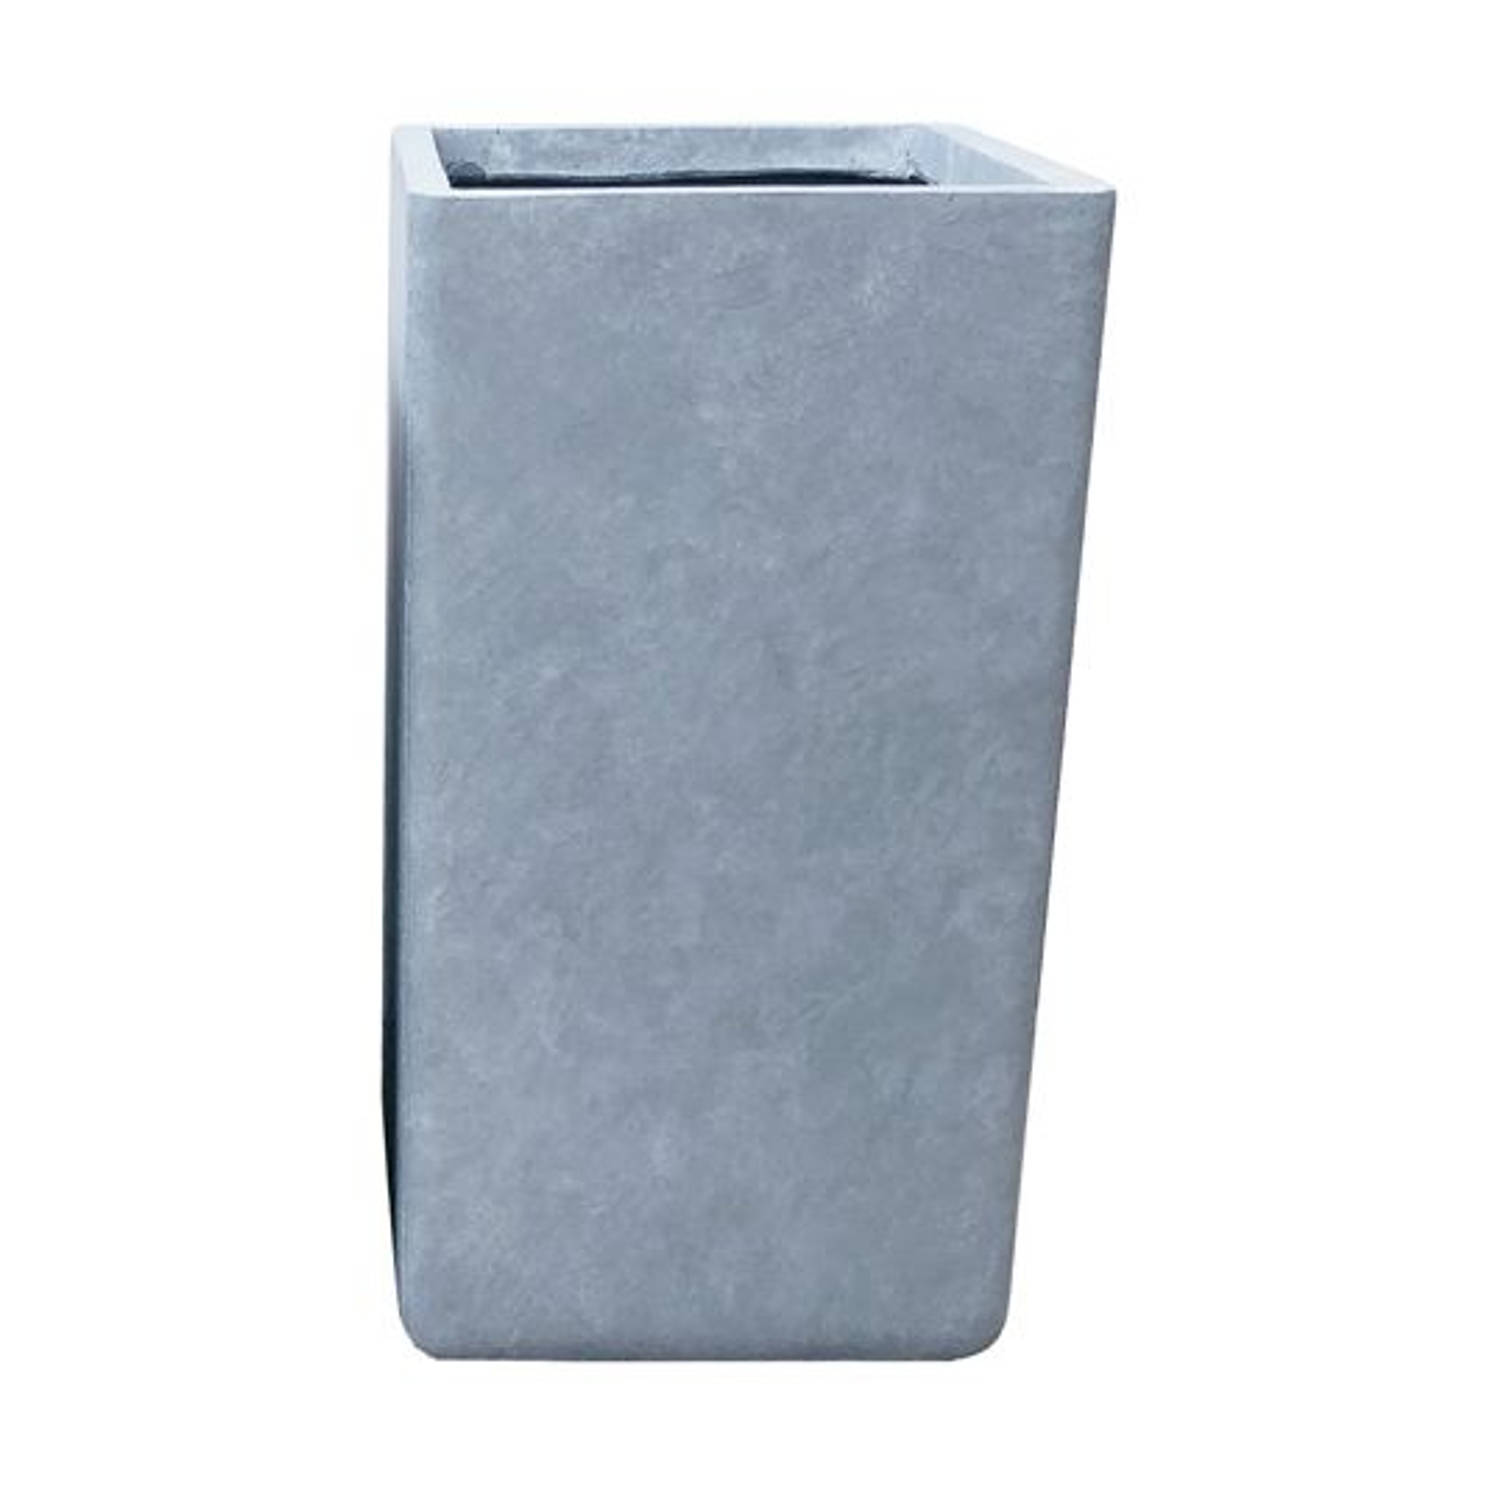 E'lite - Bloempot curved square tall basic cement 28x60 cm